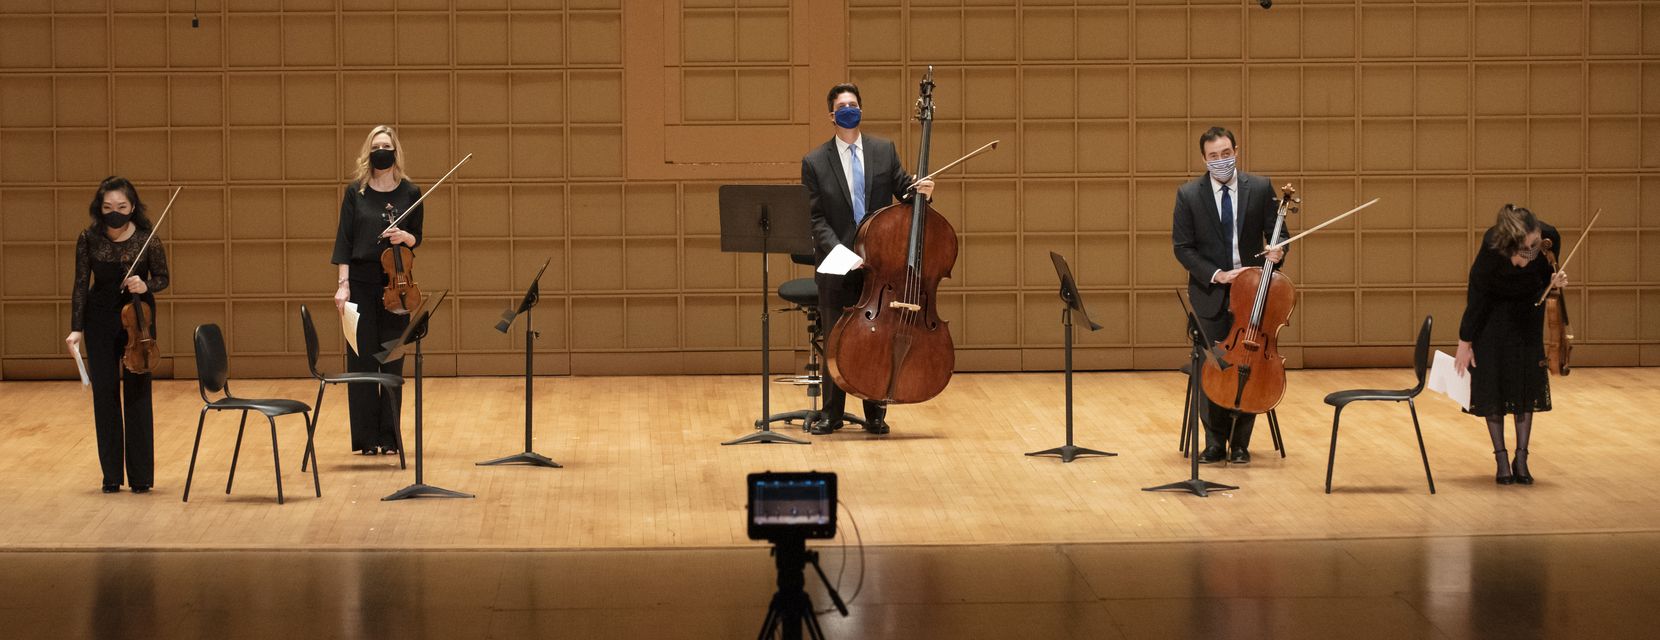 Members of the Dallas Symphony Orchestra were introduced for a video recording before performing George Walker's Lyric for Strings at the Morton H. Meyerson Symphony Center in Dallas on June 13. The recording was done to bring the sounds of the DSO to people's homes during the coronavirus pandemic.